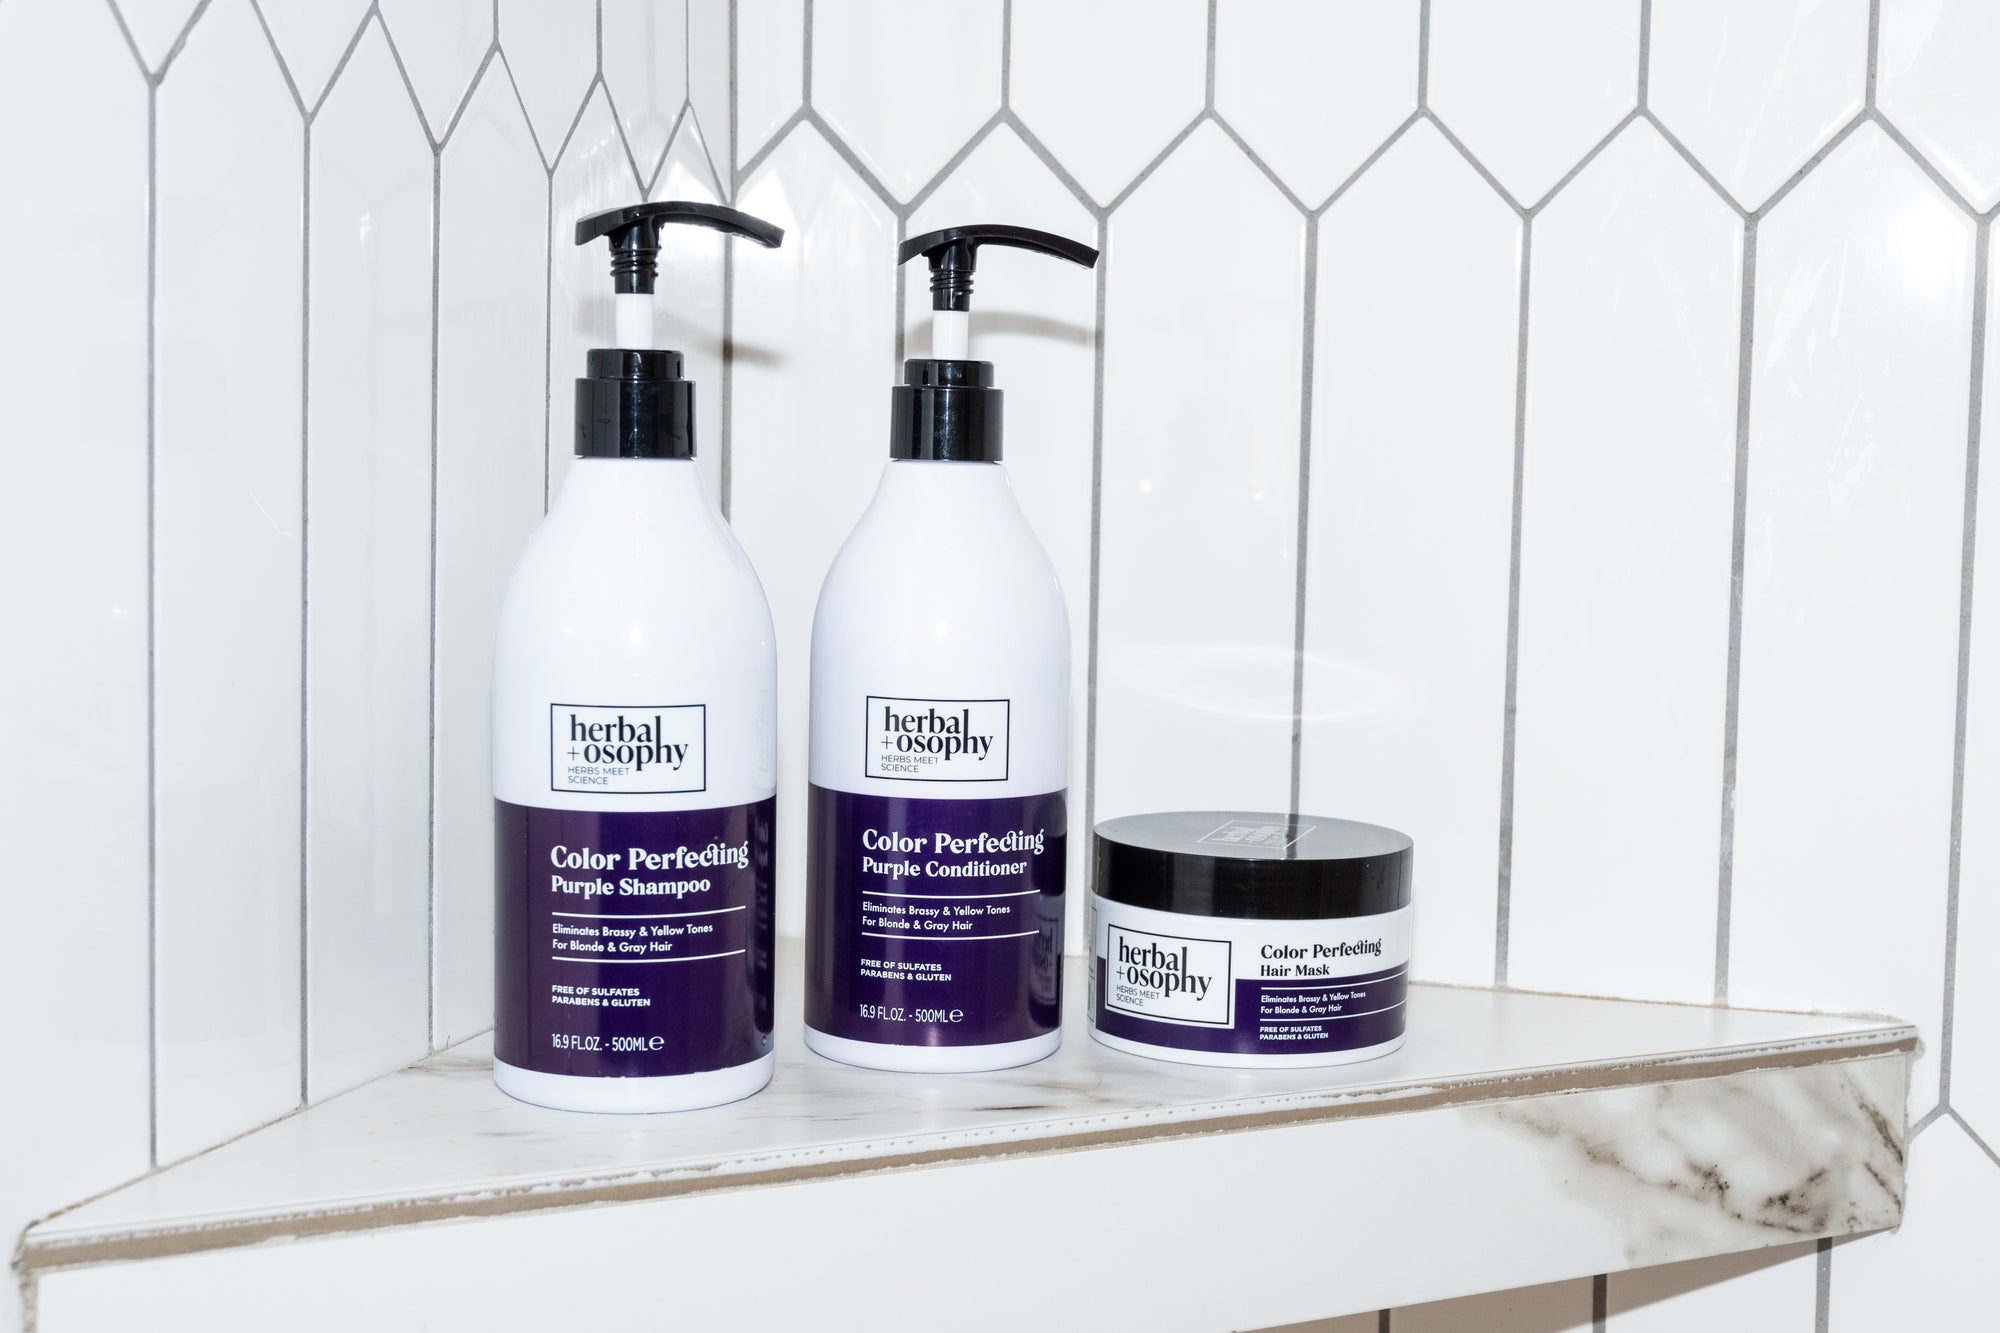 Herbalosophy Color Perfecting Purple Shampoo, Conditioner and Hair Mask in shower on shelf